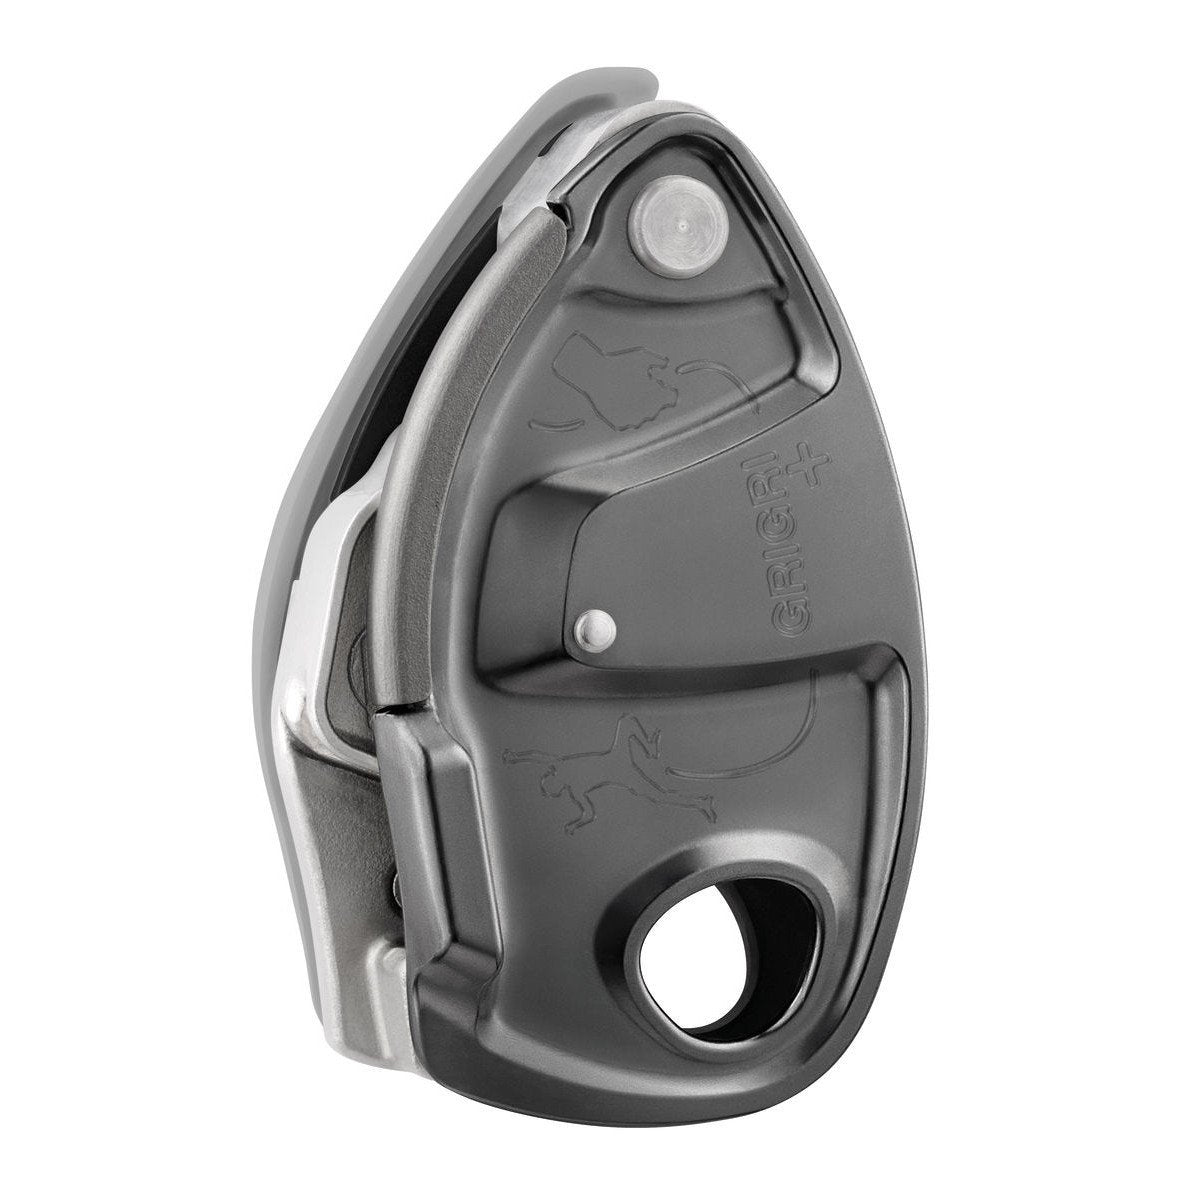 Petzl Grigri + climbing belay device, in grey colour